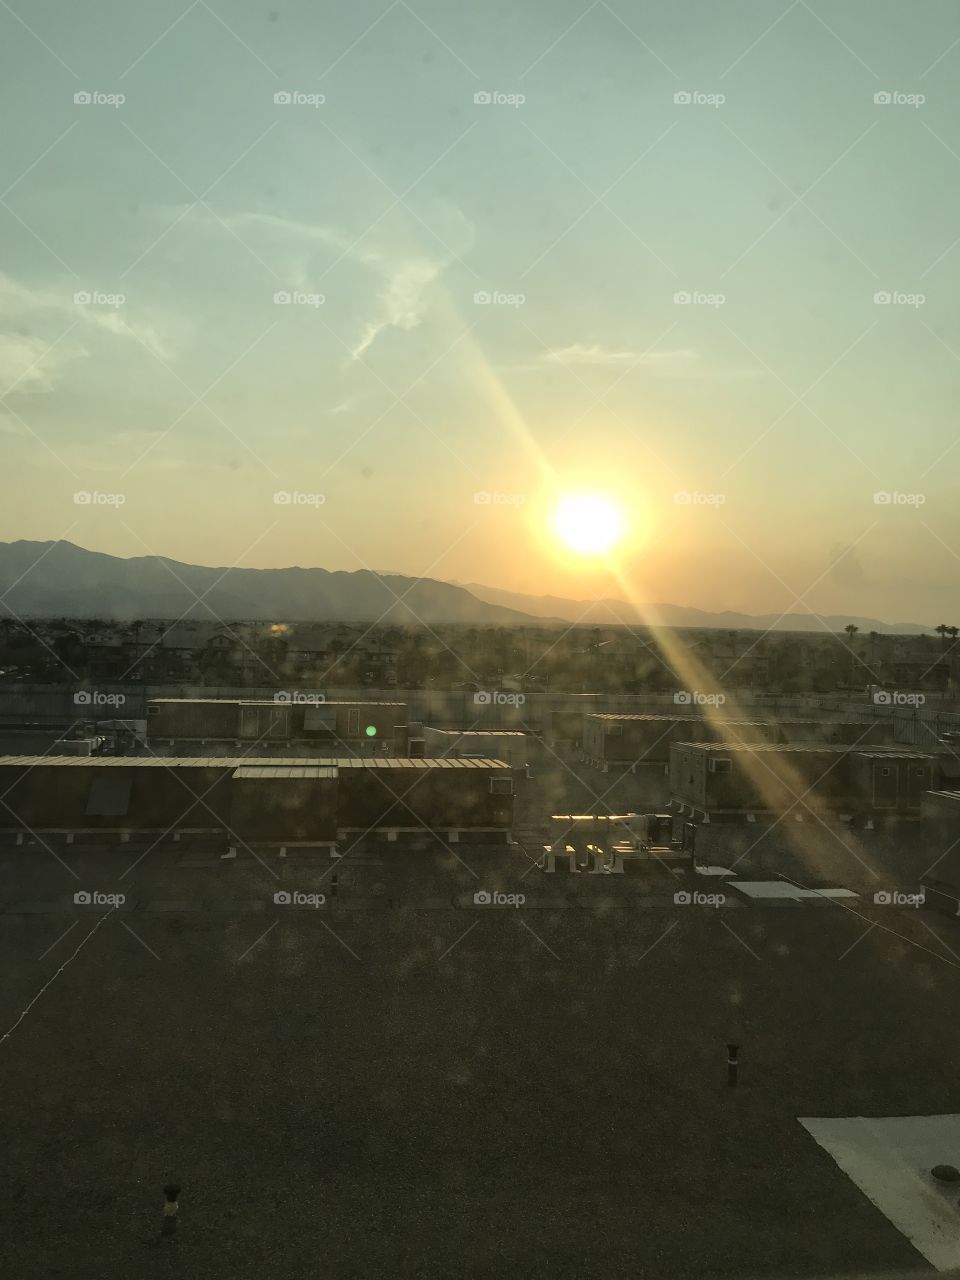 I took this from my hospital room!